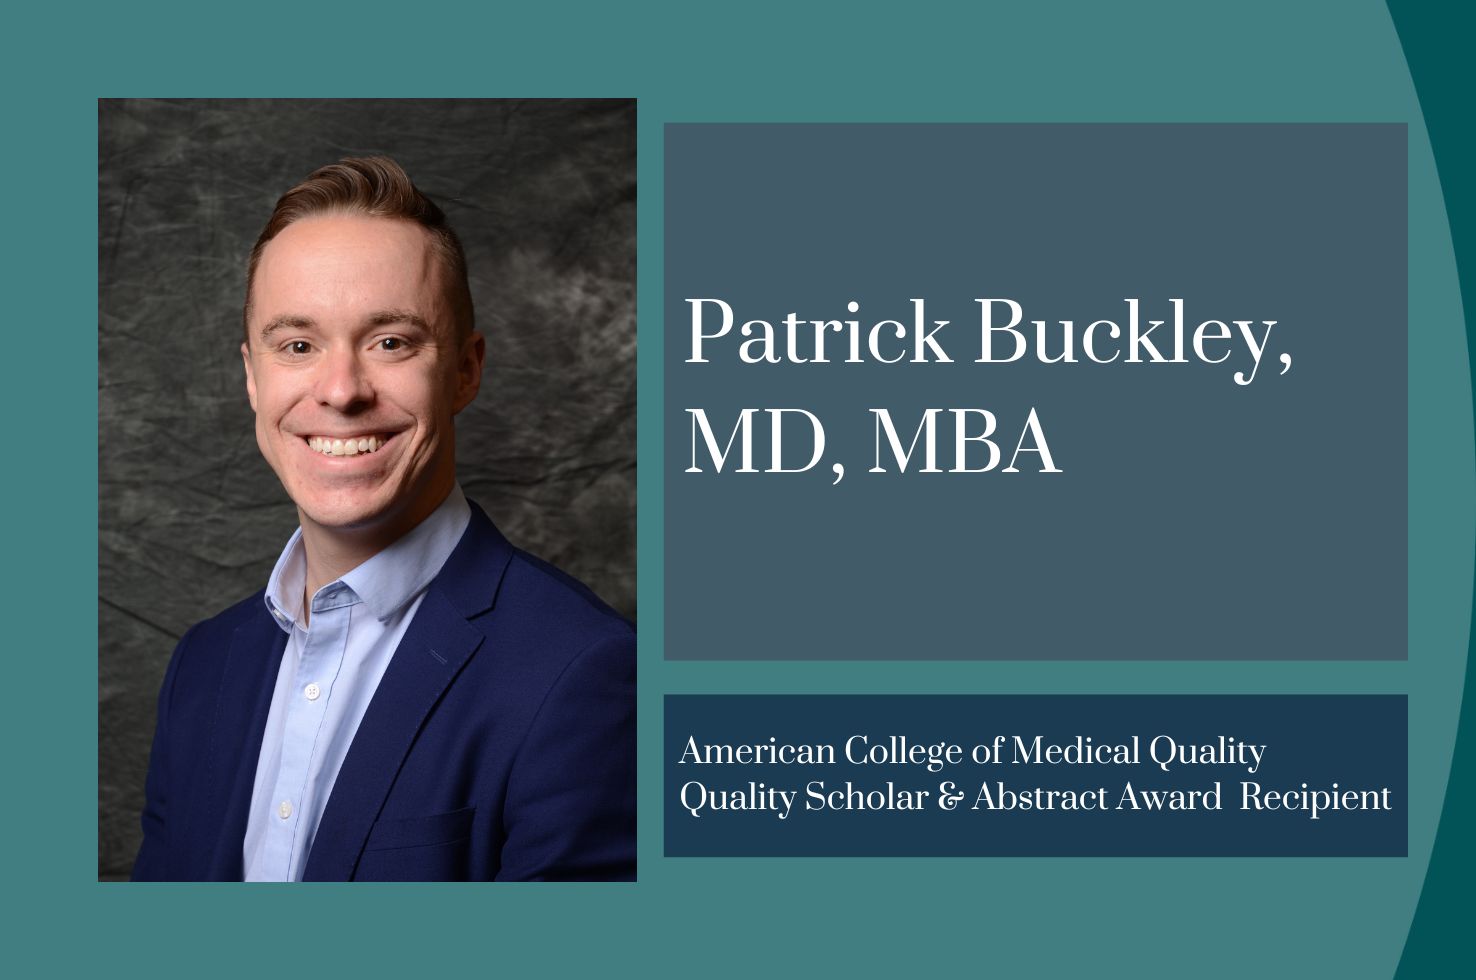 Patrick Buckley, MD, MBA (Consultation-Liaison Psychiatry Fellow) Honored  by the American College of Medical Quality